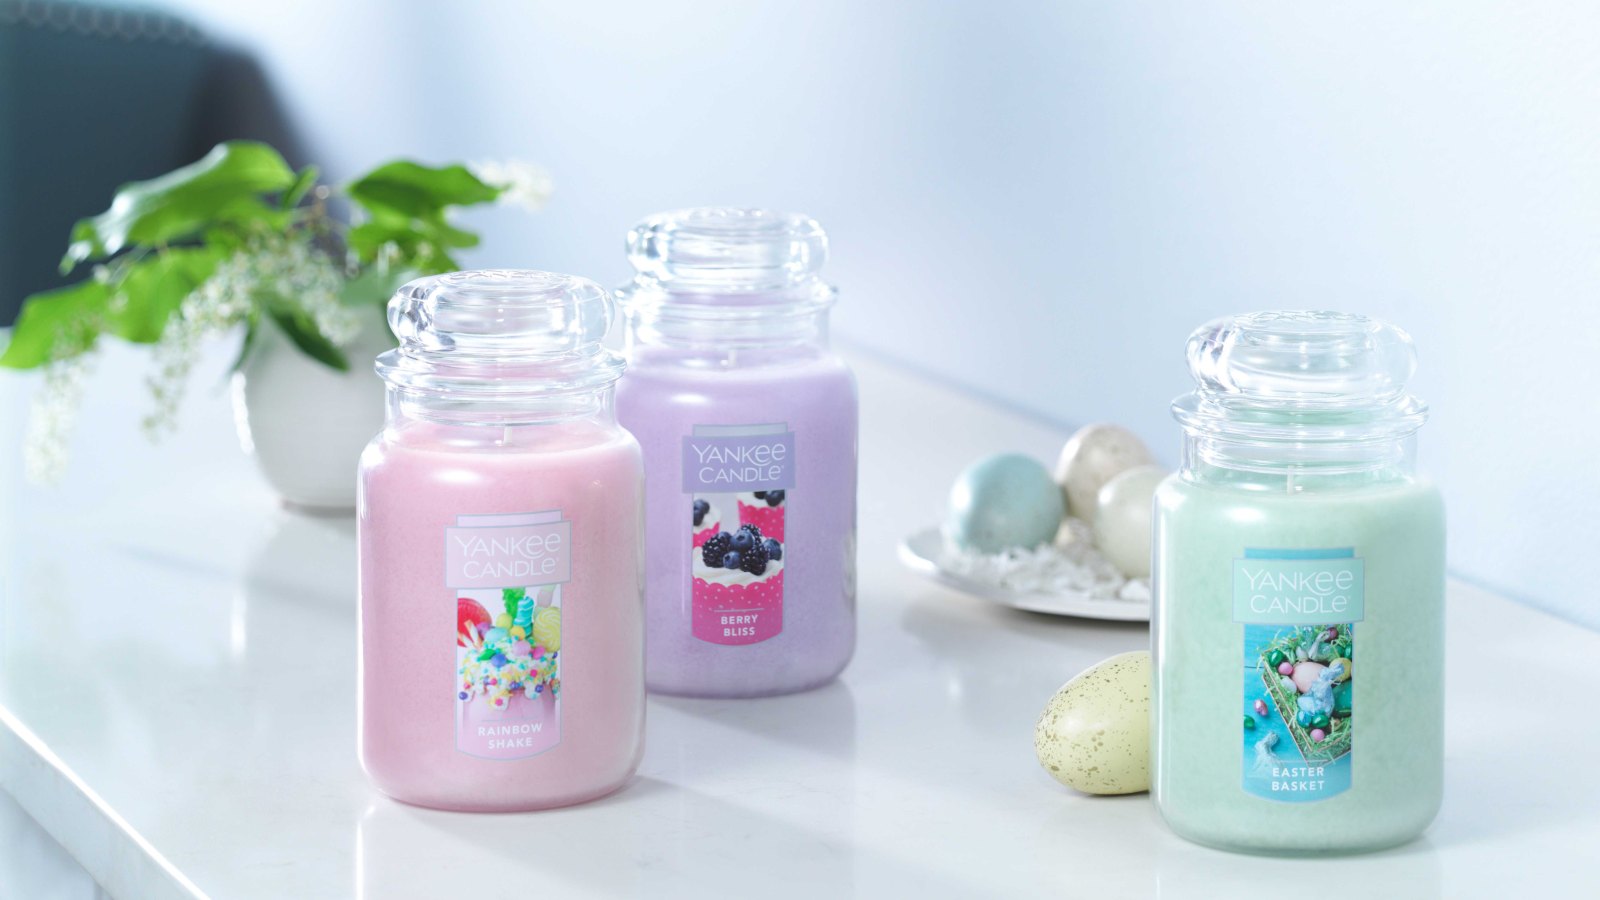 14 Best Yankee Candle Scents For Spring from Clean to Floral